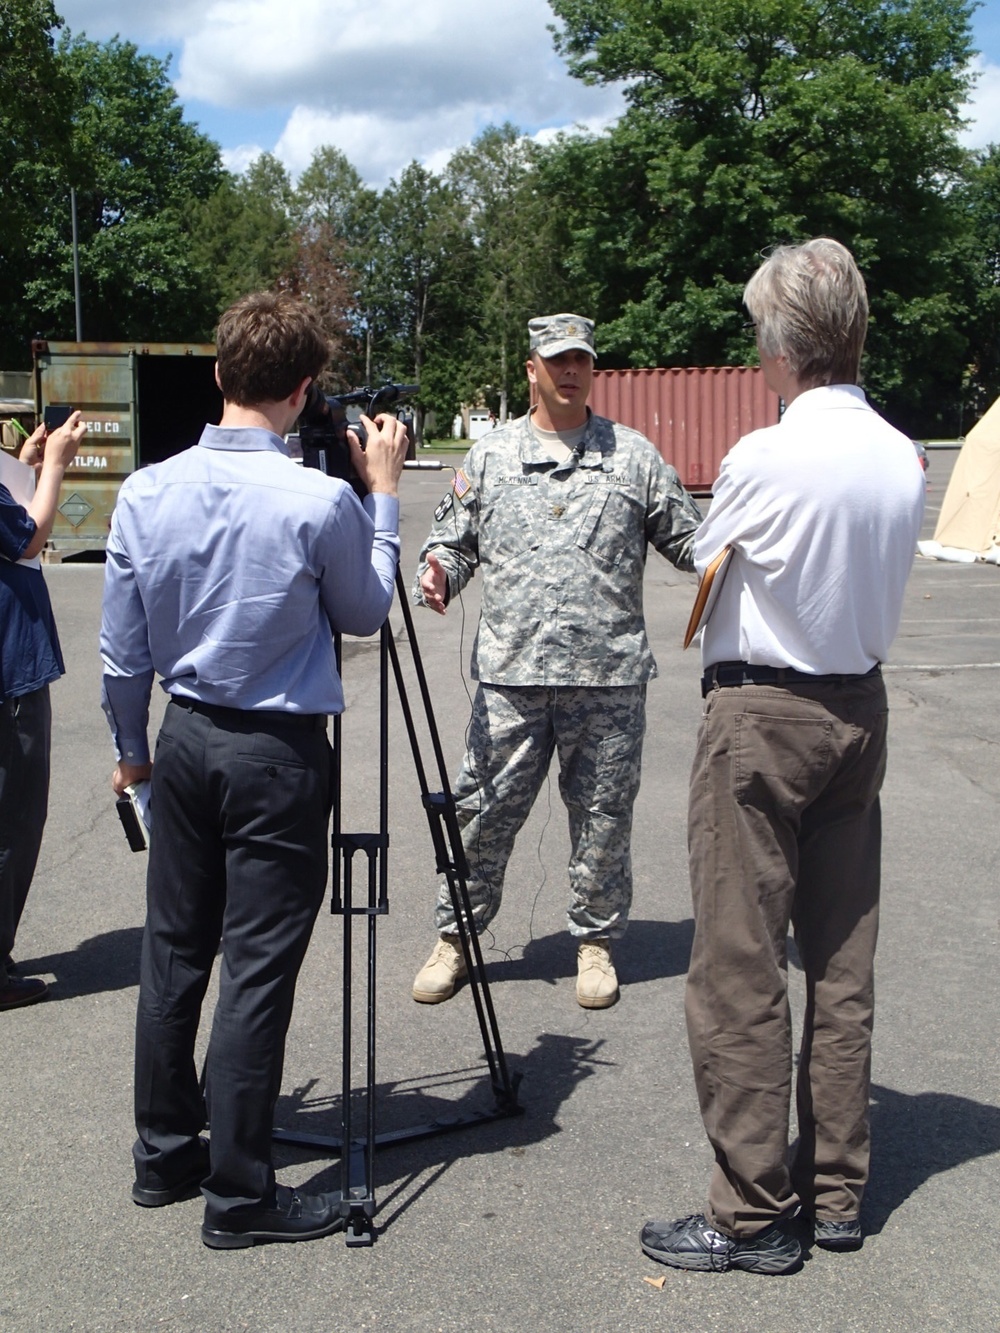 IRT Commander greets the media at Greater Chenango Cares IRT event.